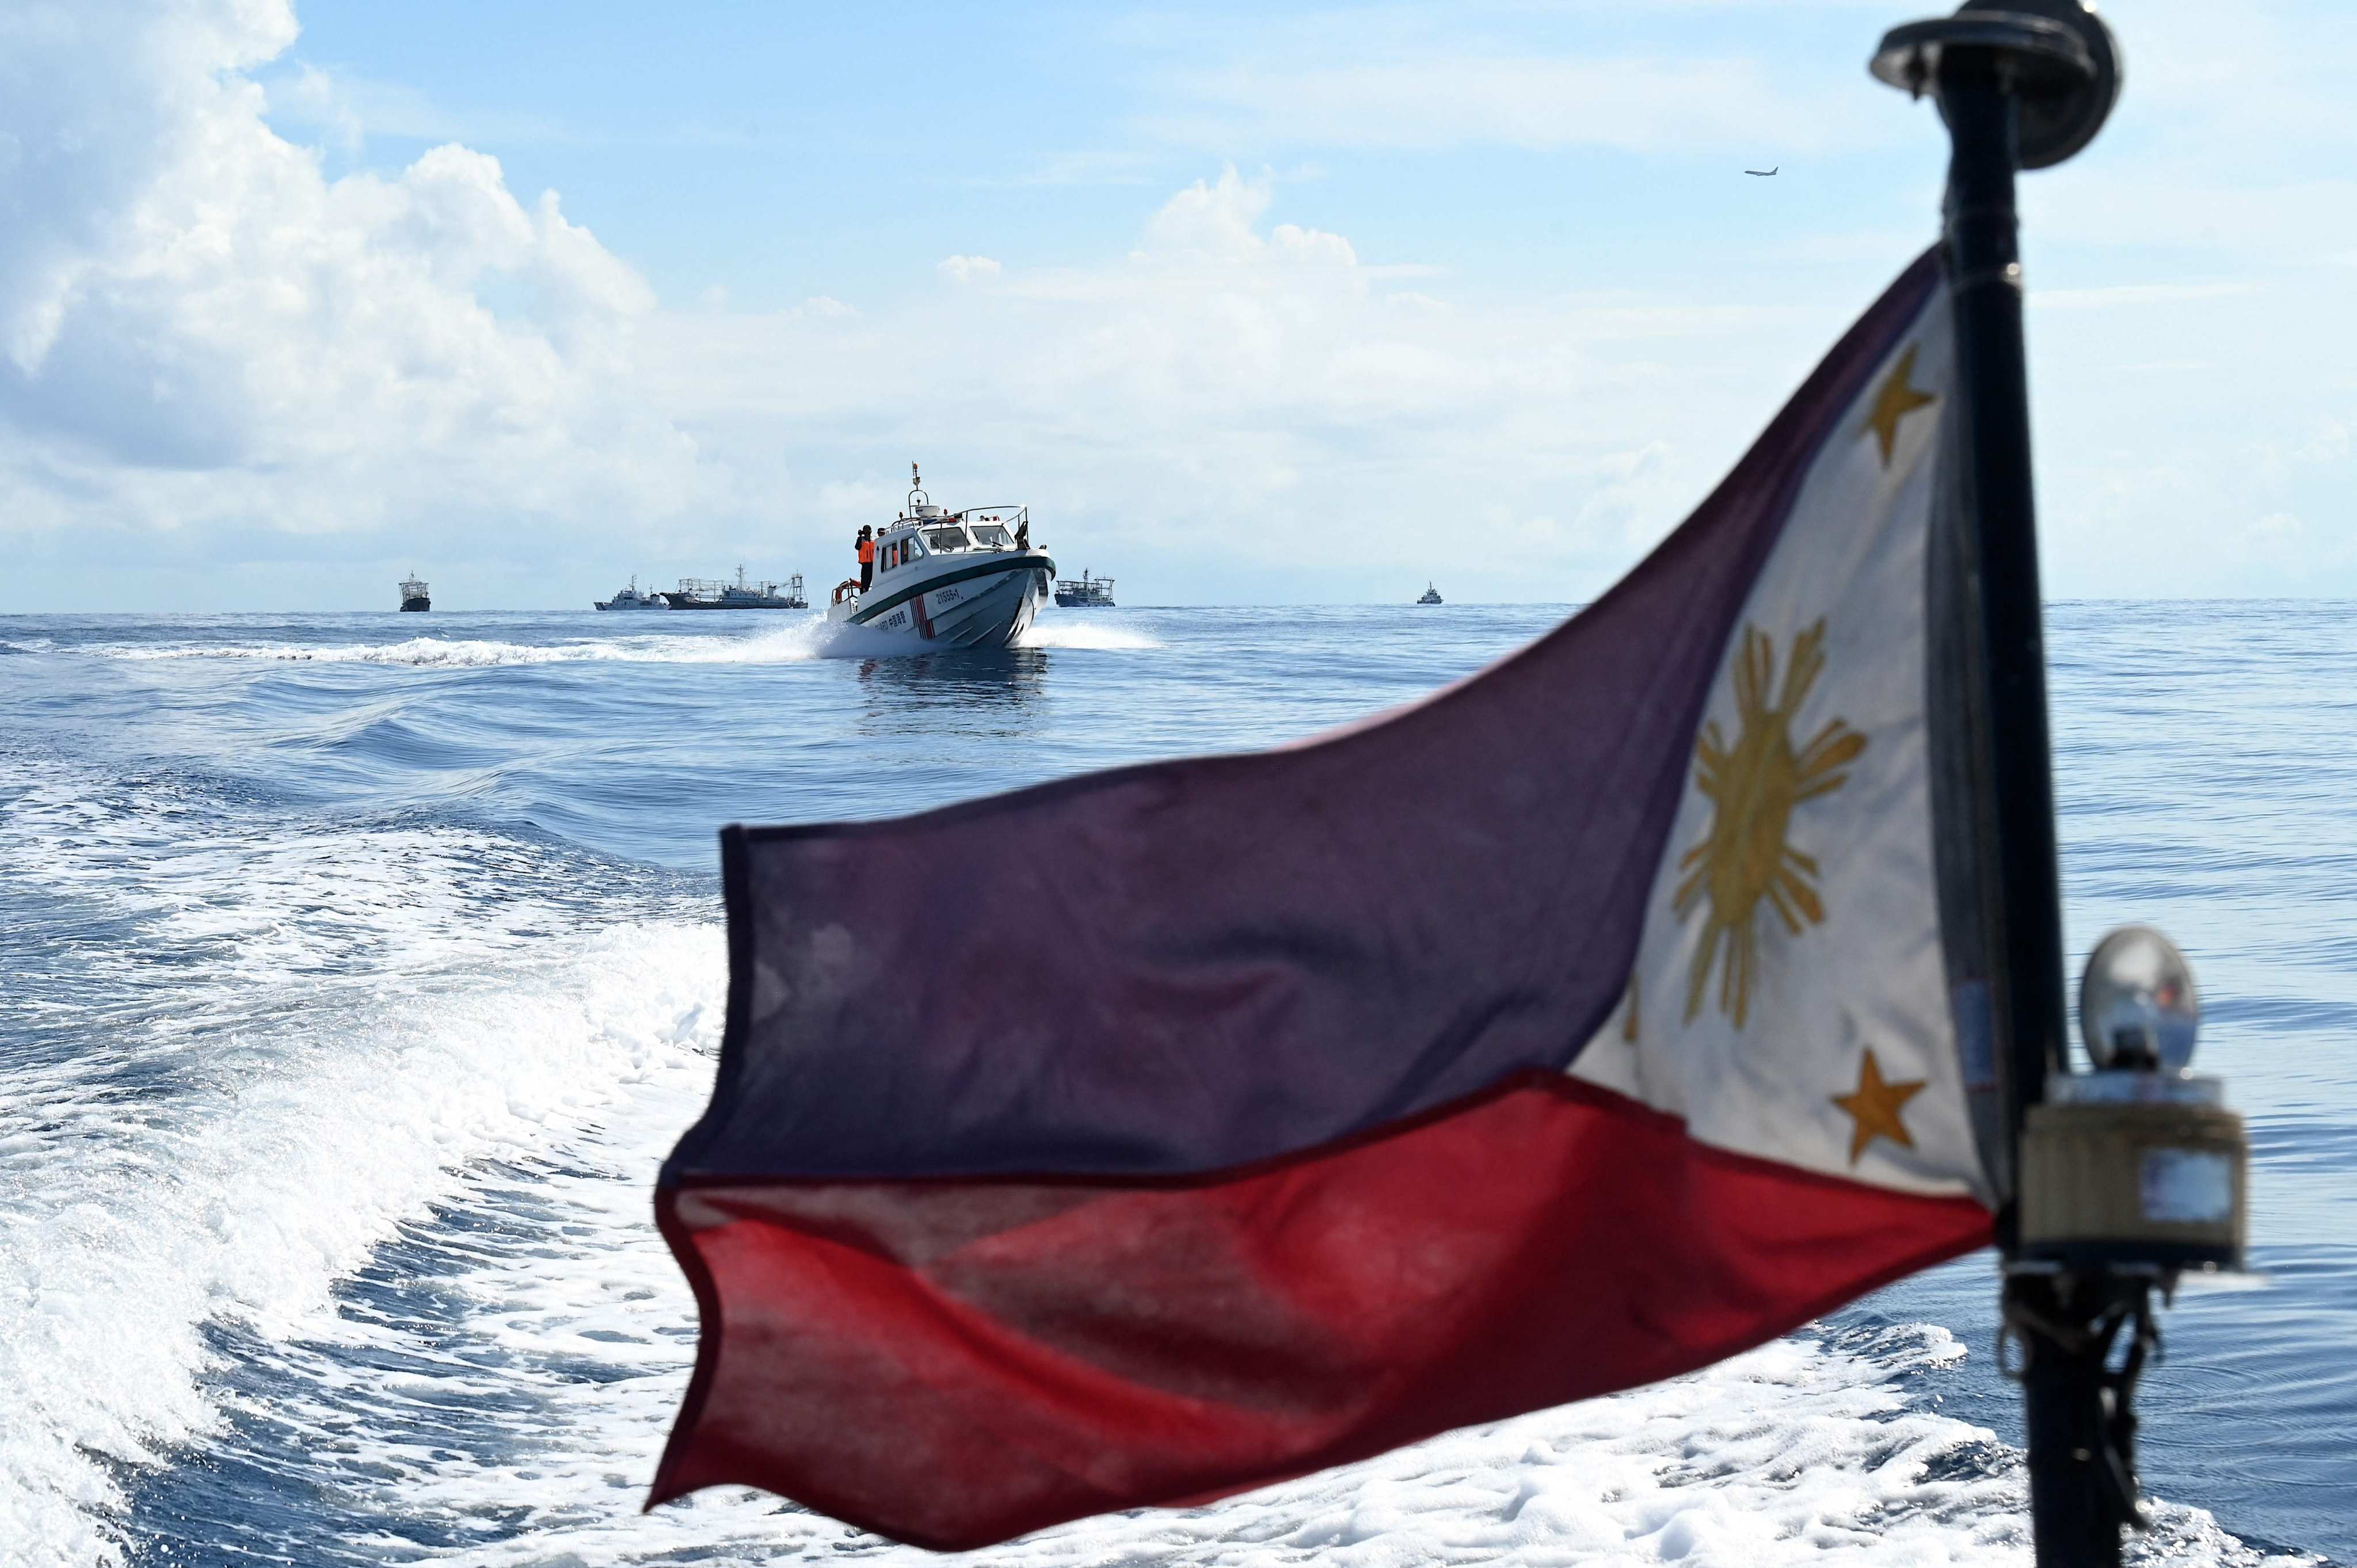 Tensions over the South China Sea are expected to rise this week as the leaders of the Philippines, the US and Japan are expected to announce joint naval patrols in the disputed regions during a summit in Washington. Photo: AFP